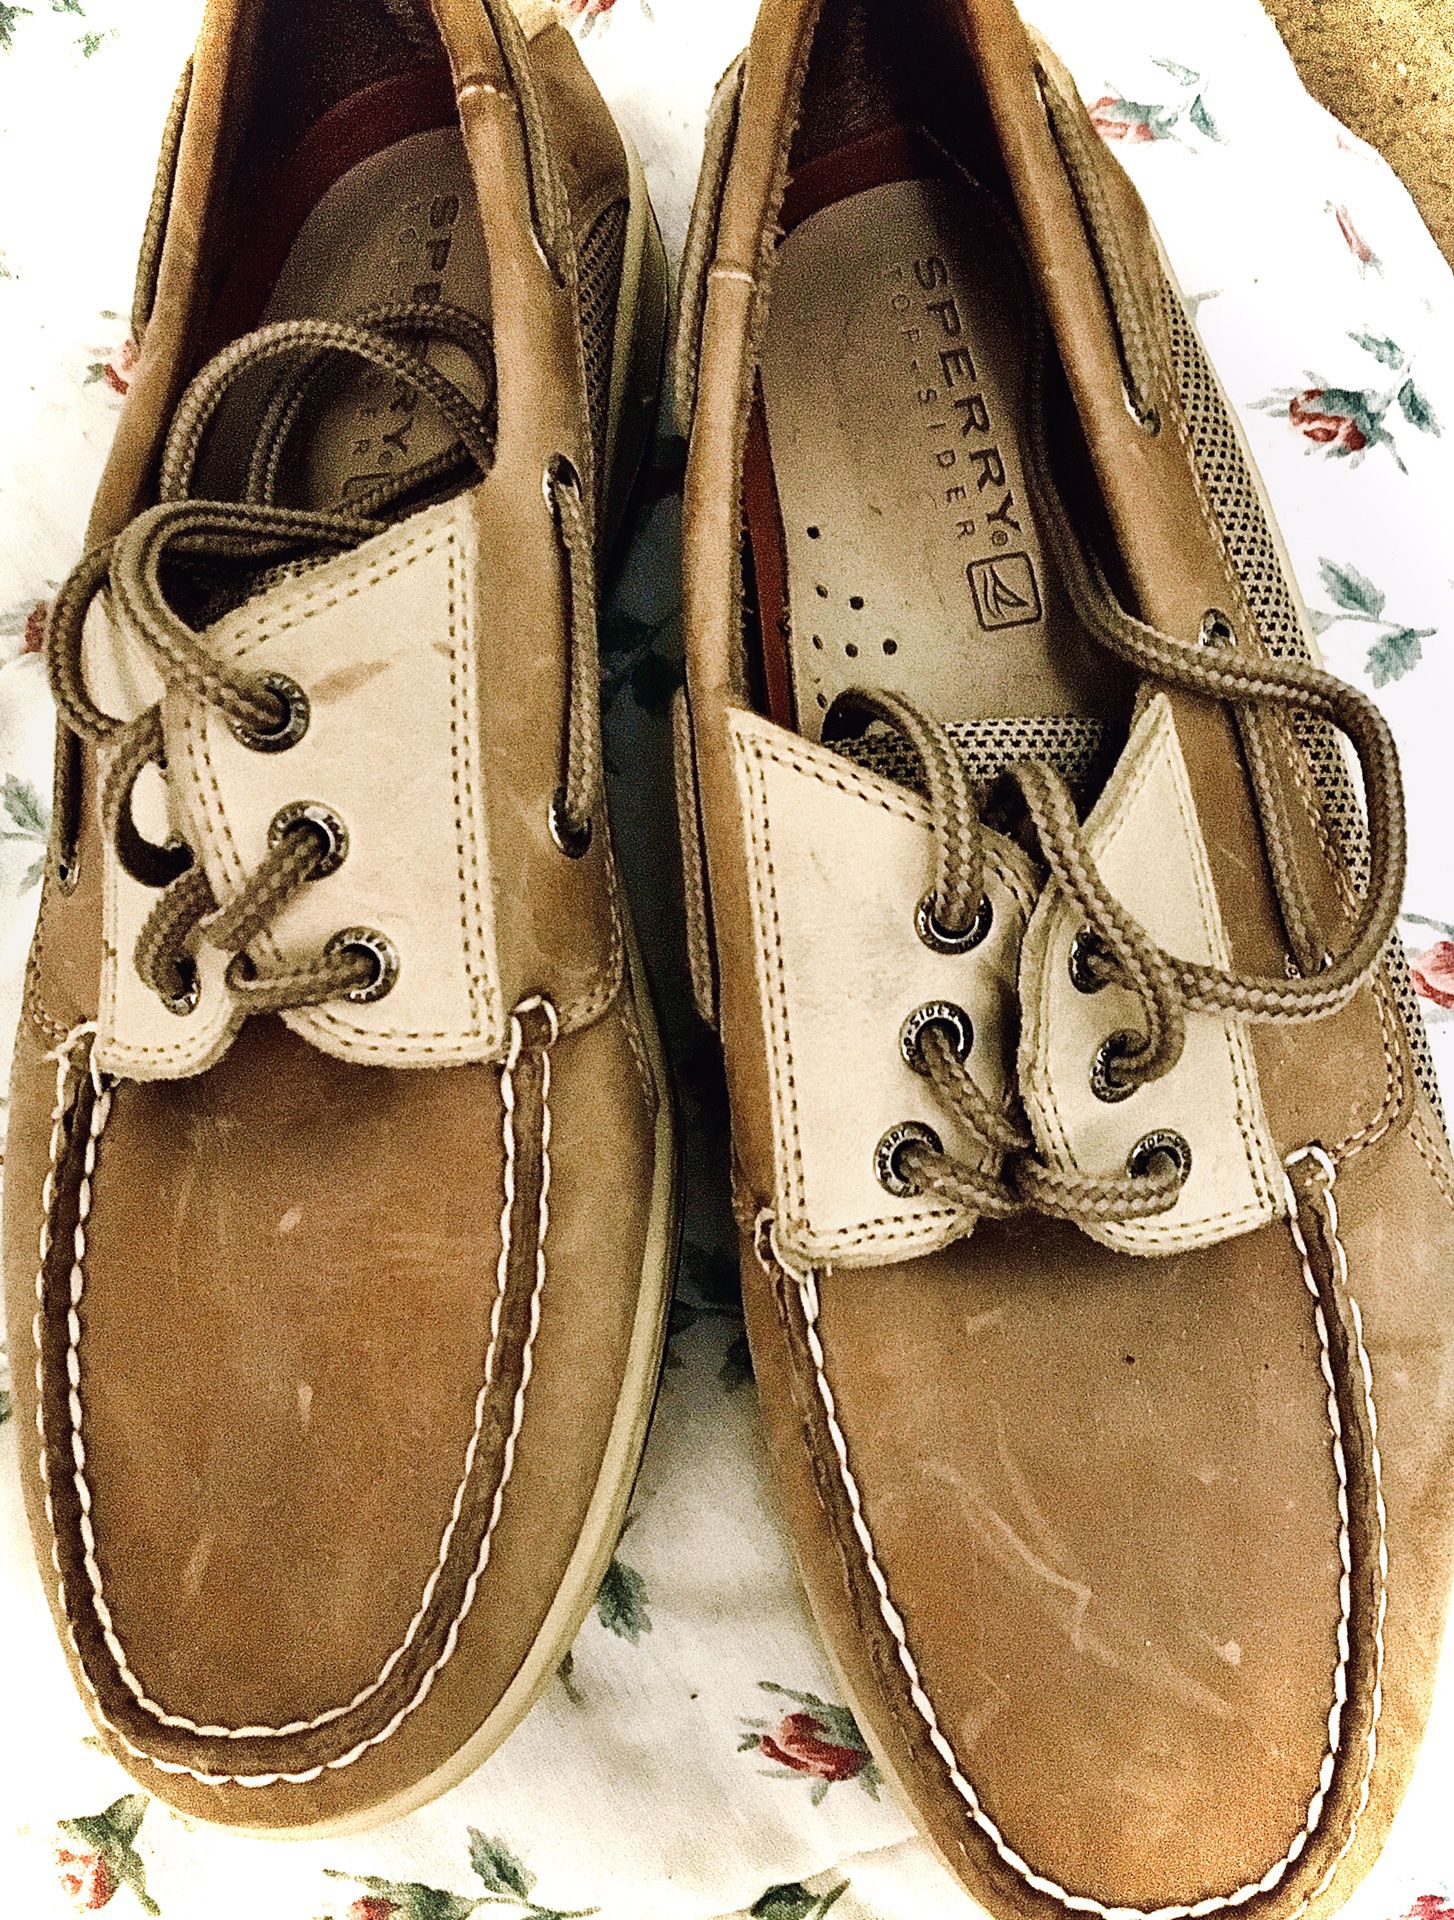 Sperry’s Men’s shoes size 10